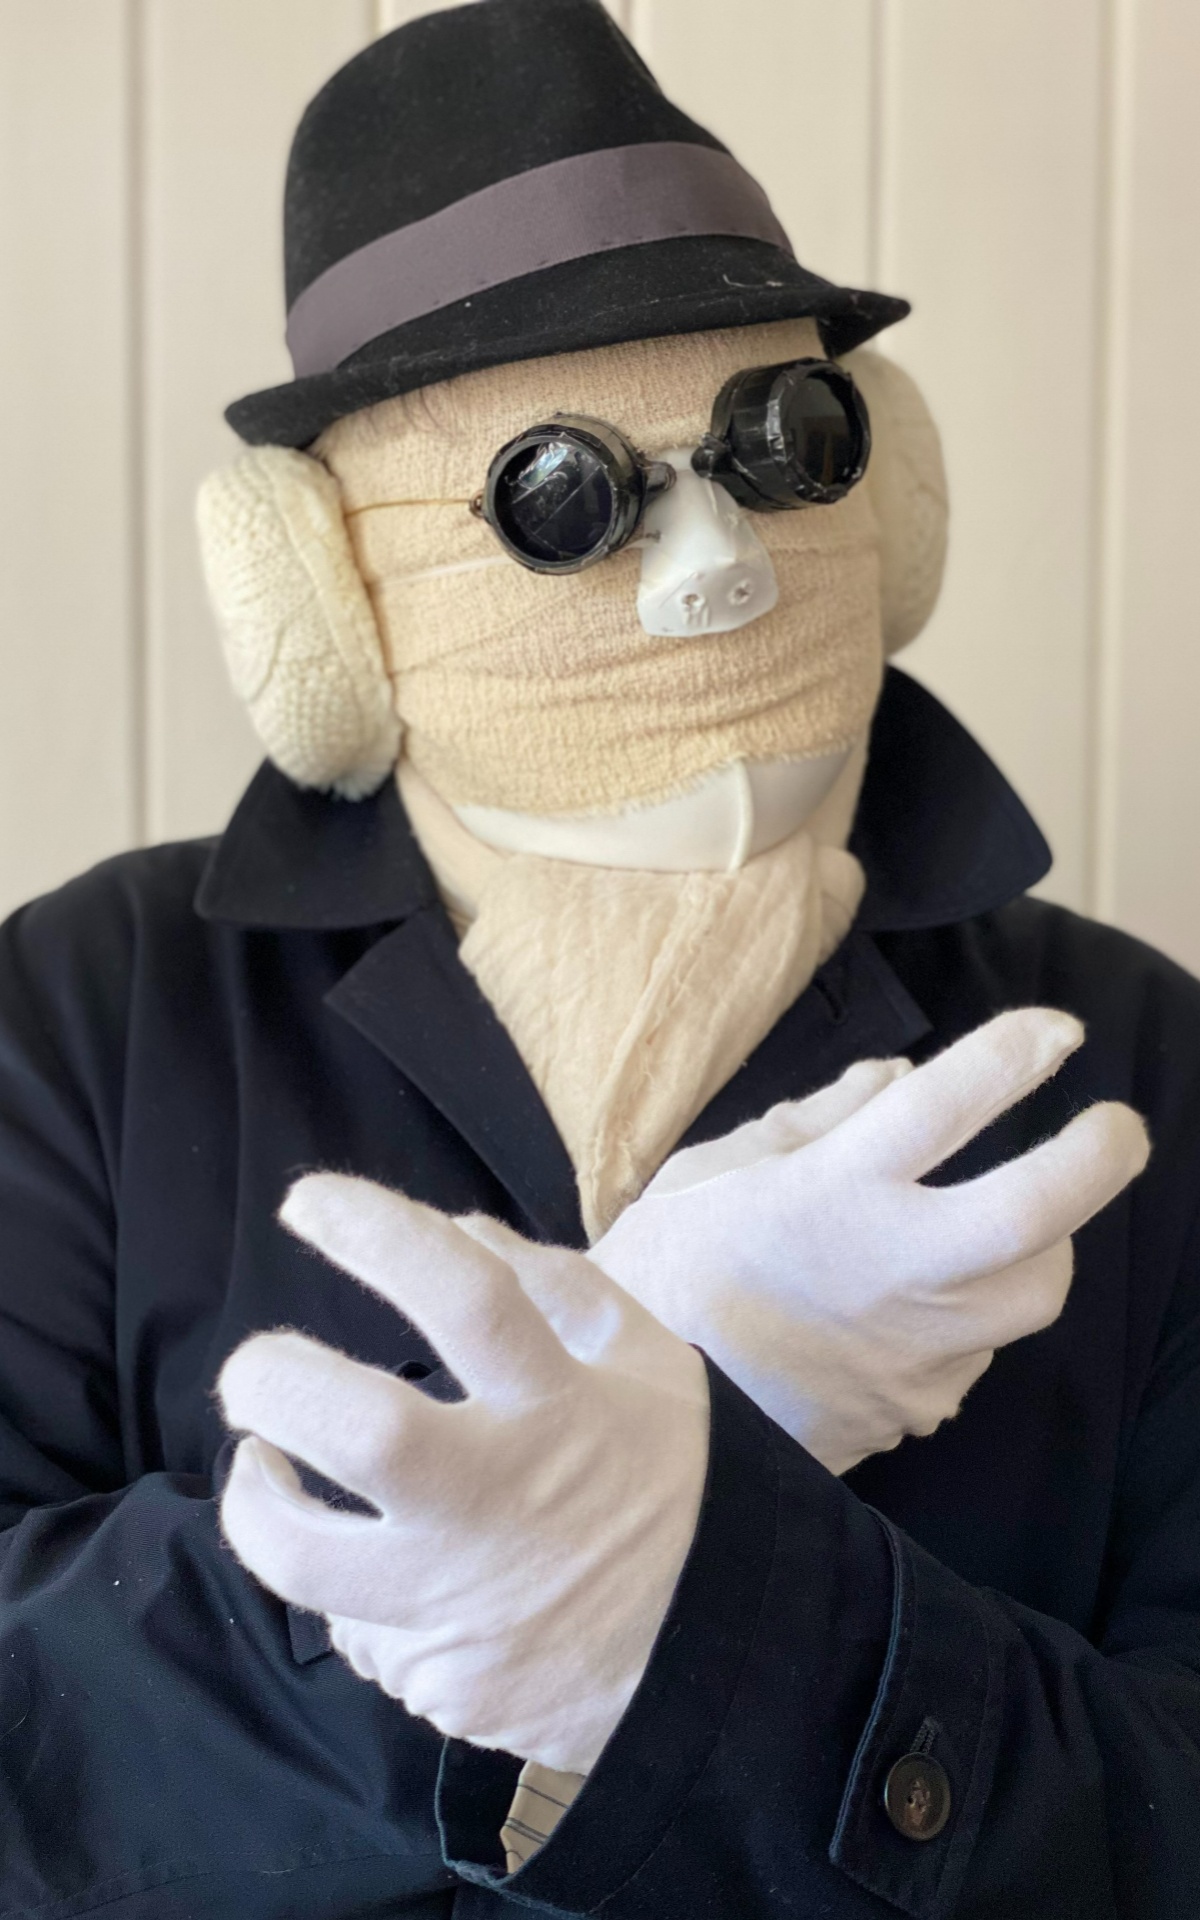 A person with a fully covered head in bandages including ears. They wear a black ‘pork pie’ style hat, blacked out goggles and a black mac style coat. Their white gloved hands are crossed in front of them below their neck. 